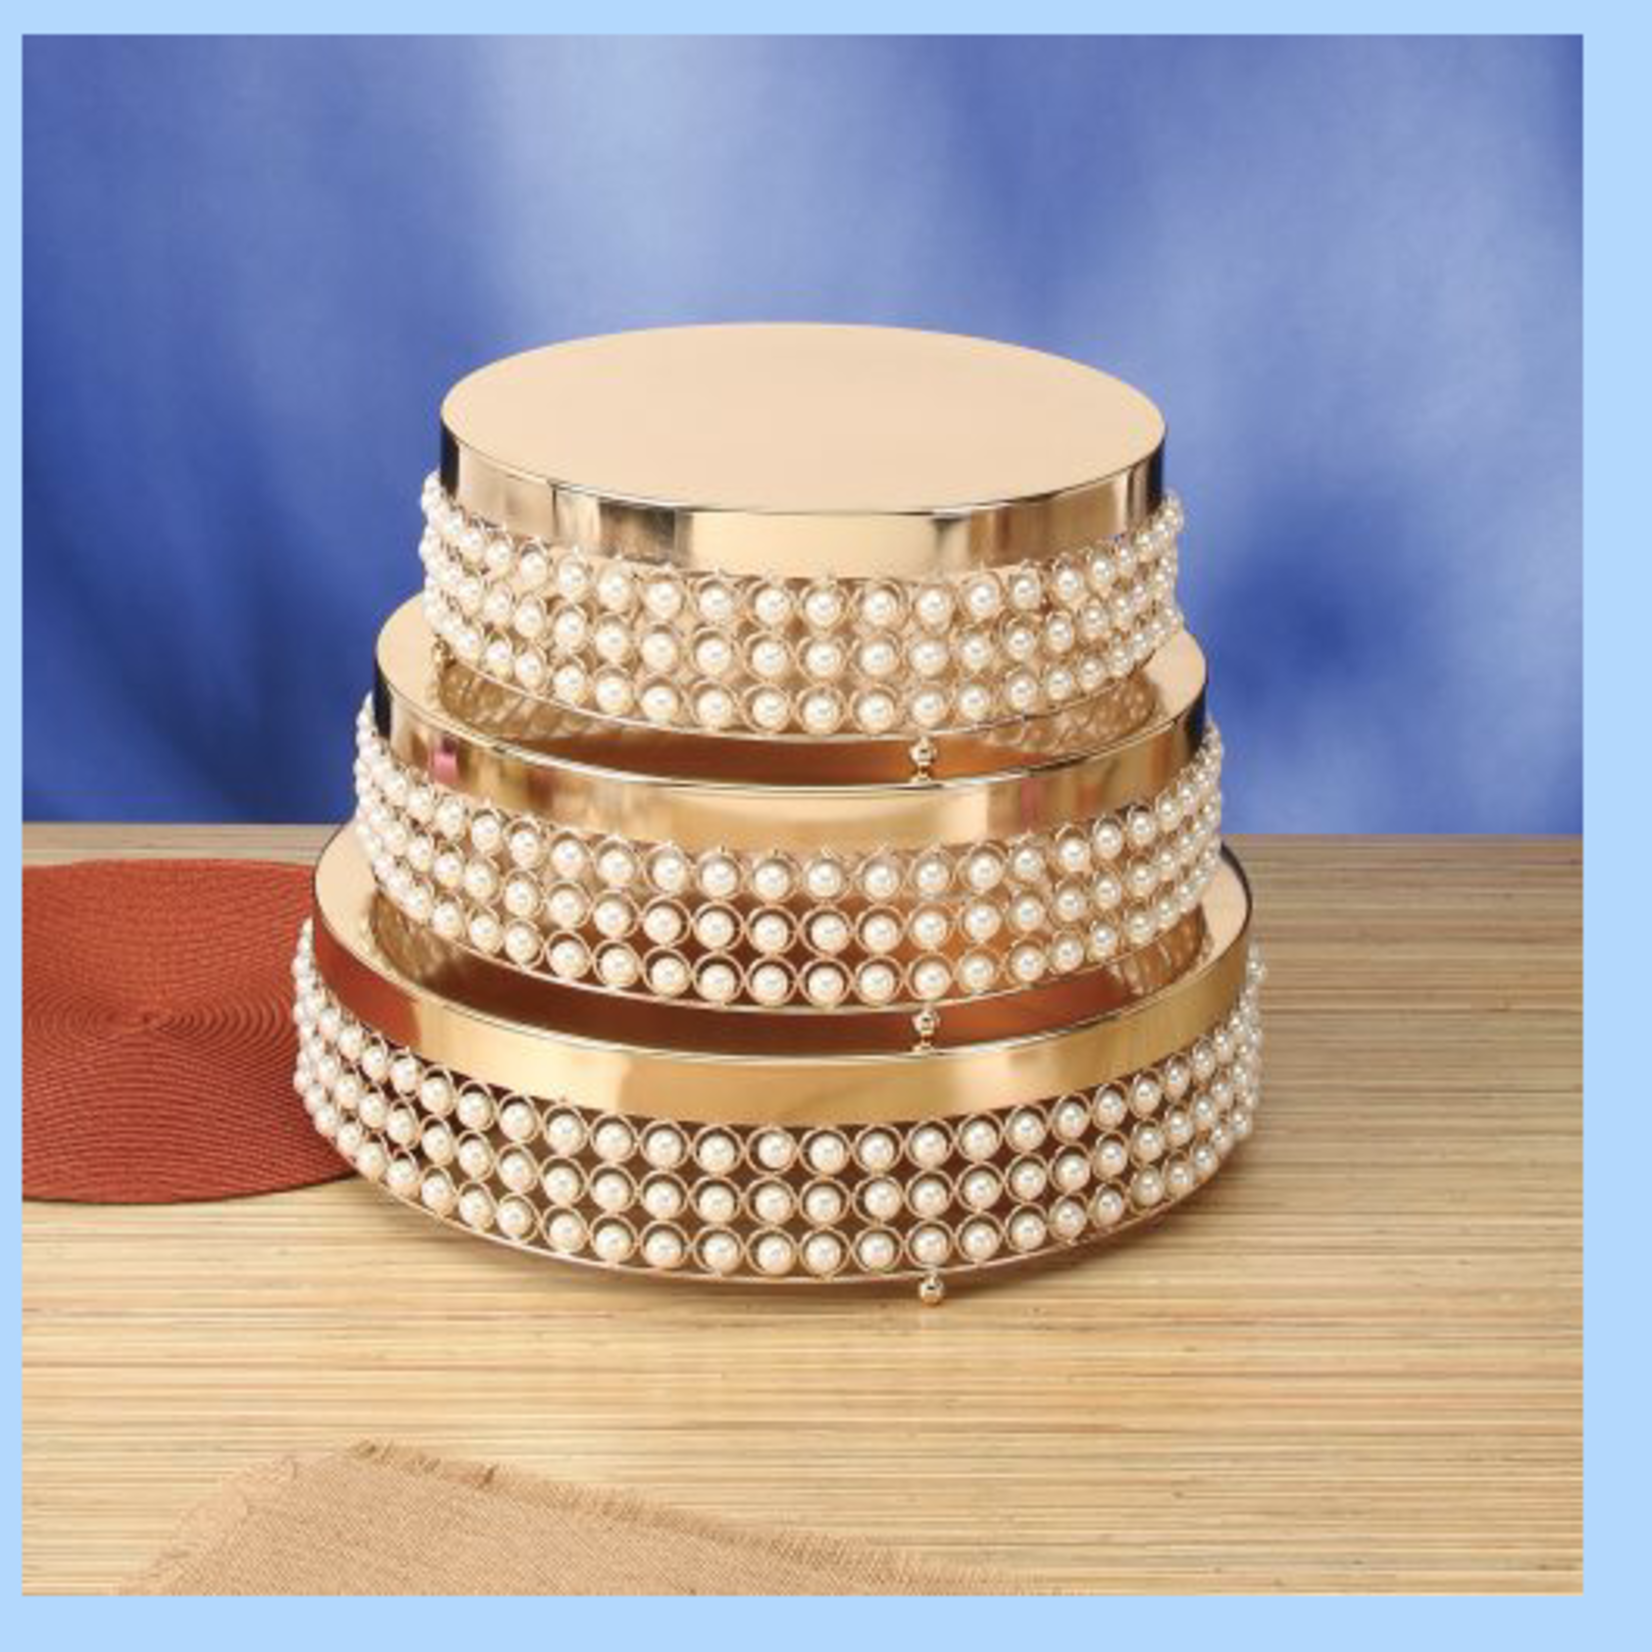 4.75”H X 14”D  ROUND METAL CAKE STAND W/ PEARLS